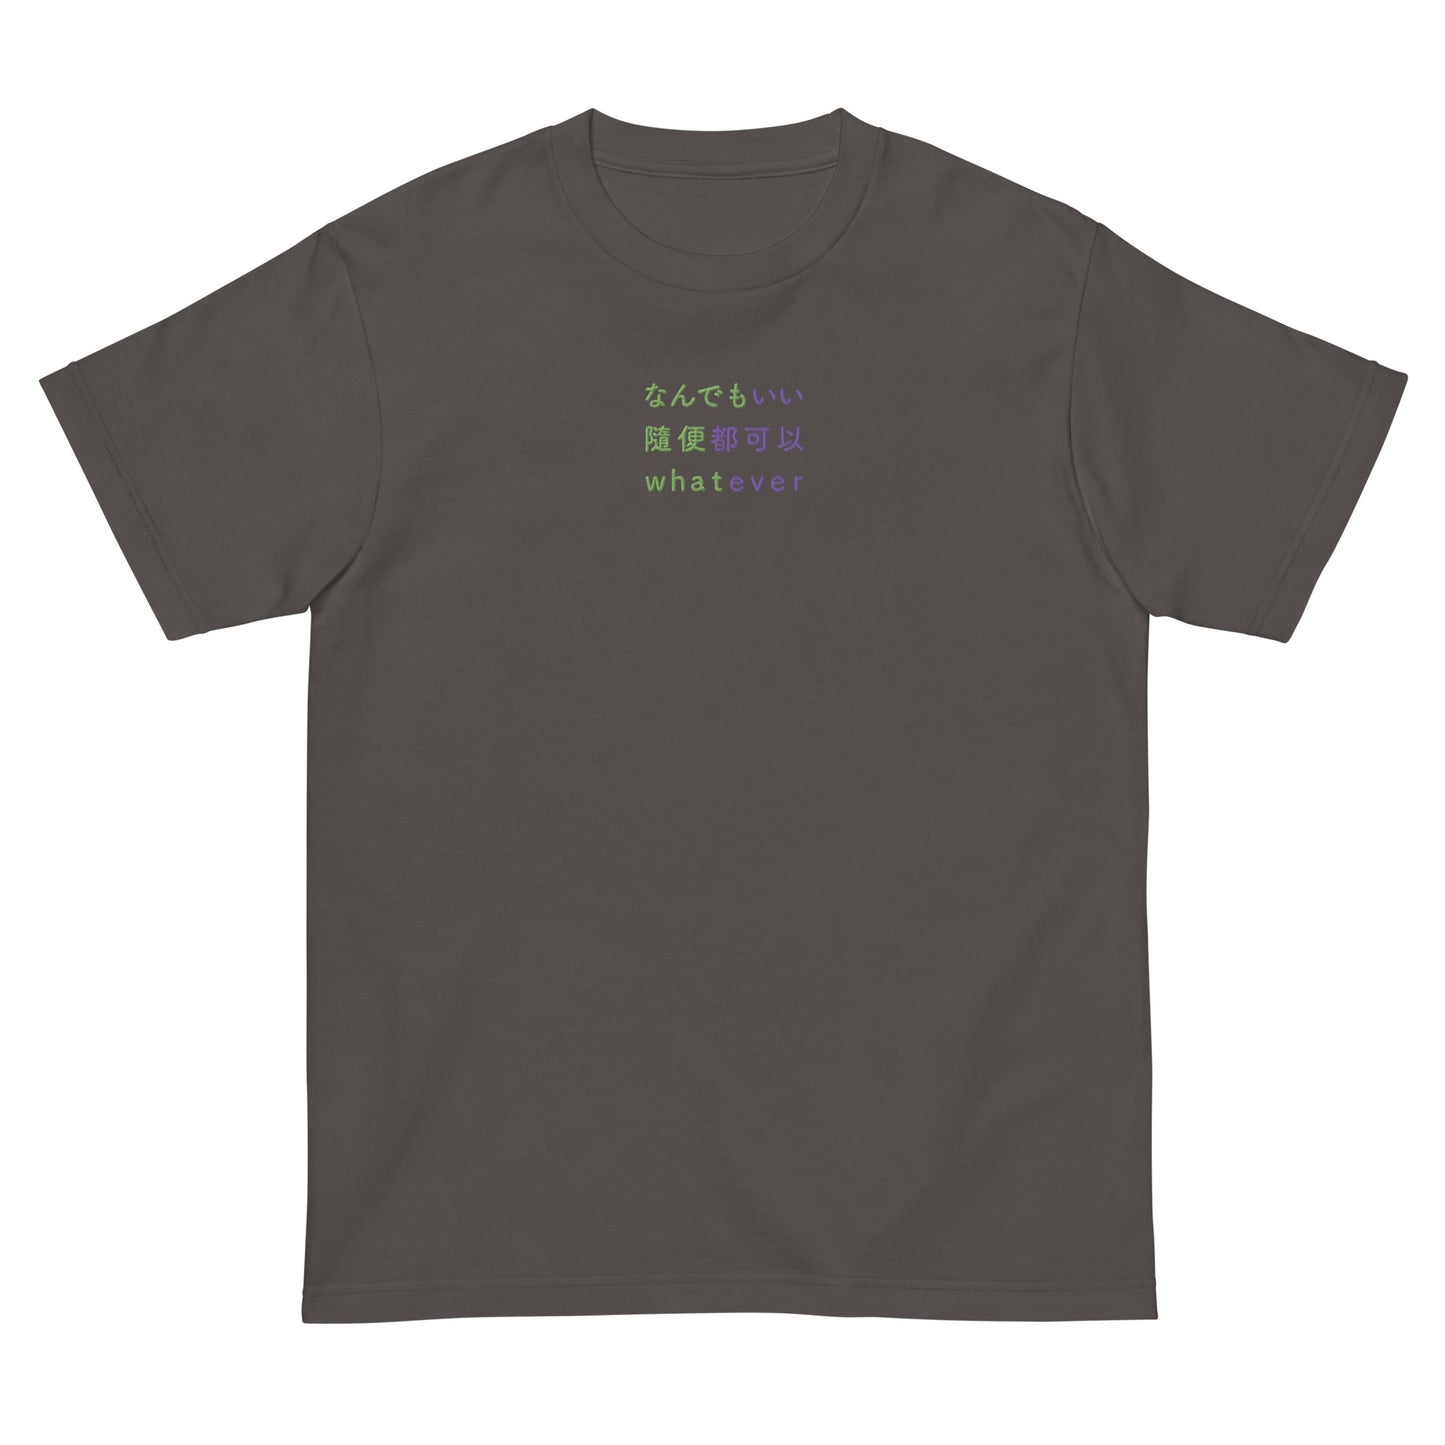 Dark Gray High Quality Tee - Front Design with an Green,Purple Embroidery "Whatever" in Japanese,Chinese and English